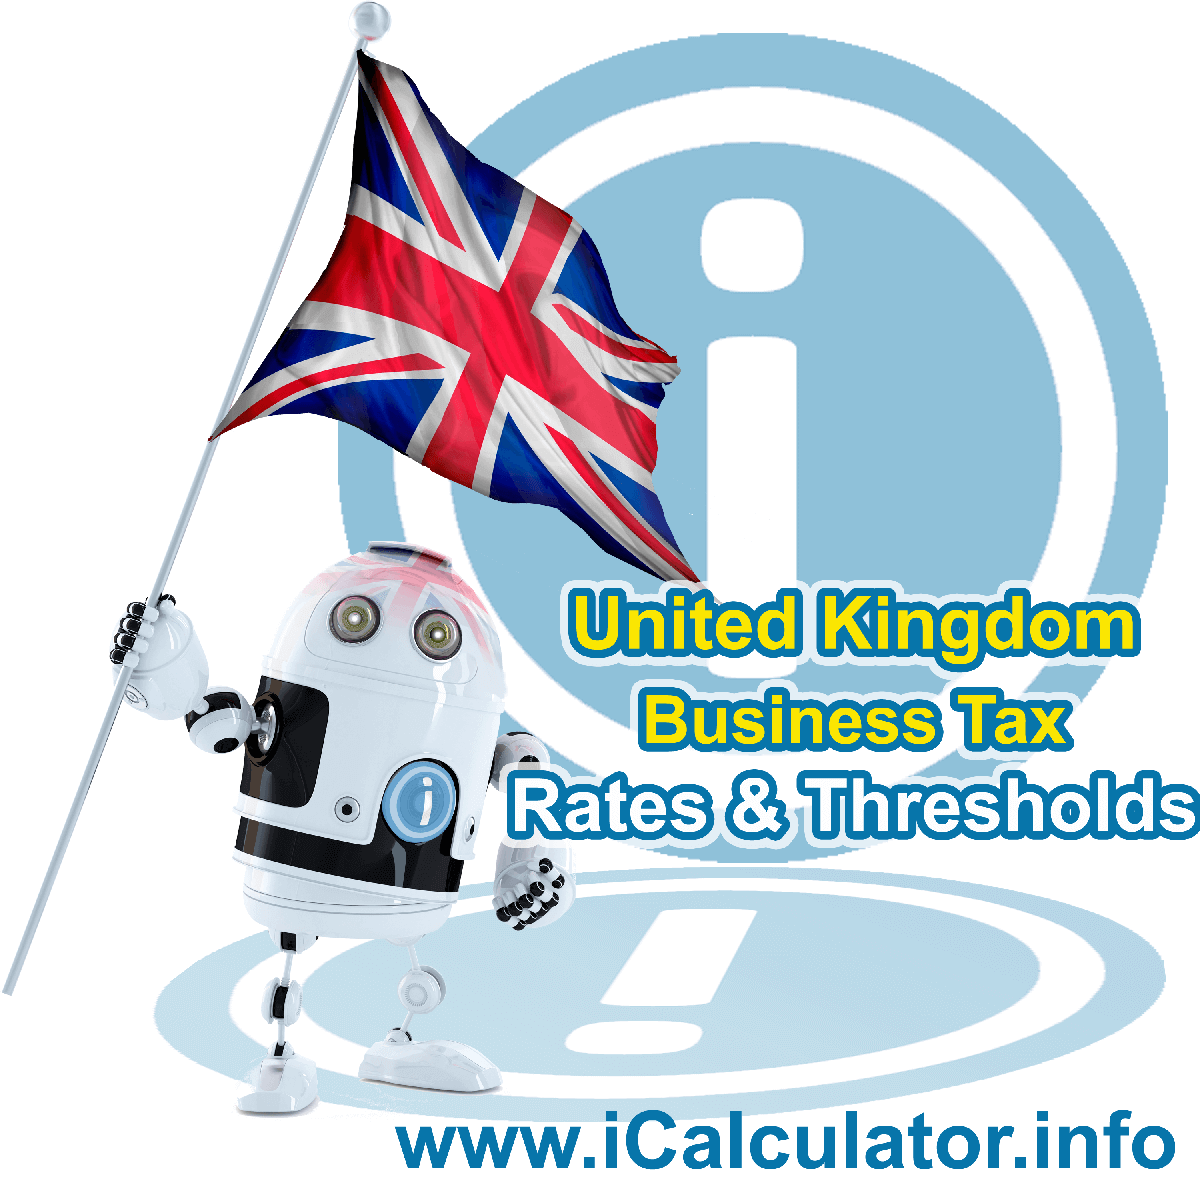 United Kingdom Corporation Tax Rates in 2023. This image shows the United Kingdom flag and information relating to the corporation tax formula for the United Kingdom Corporation Tax Calculator in 2023